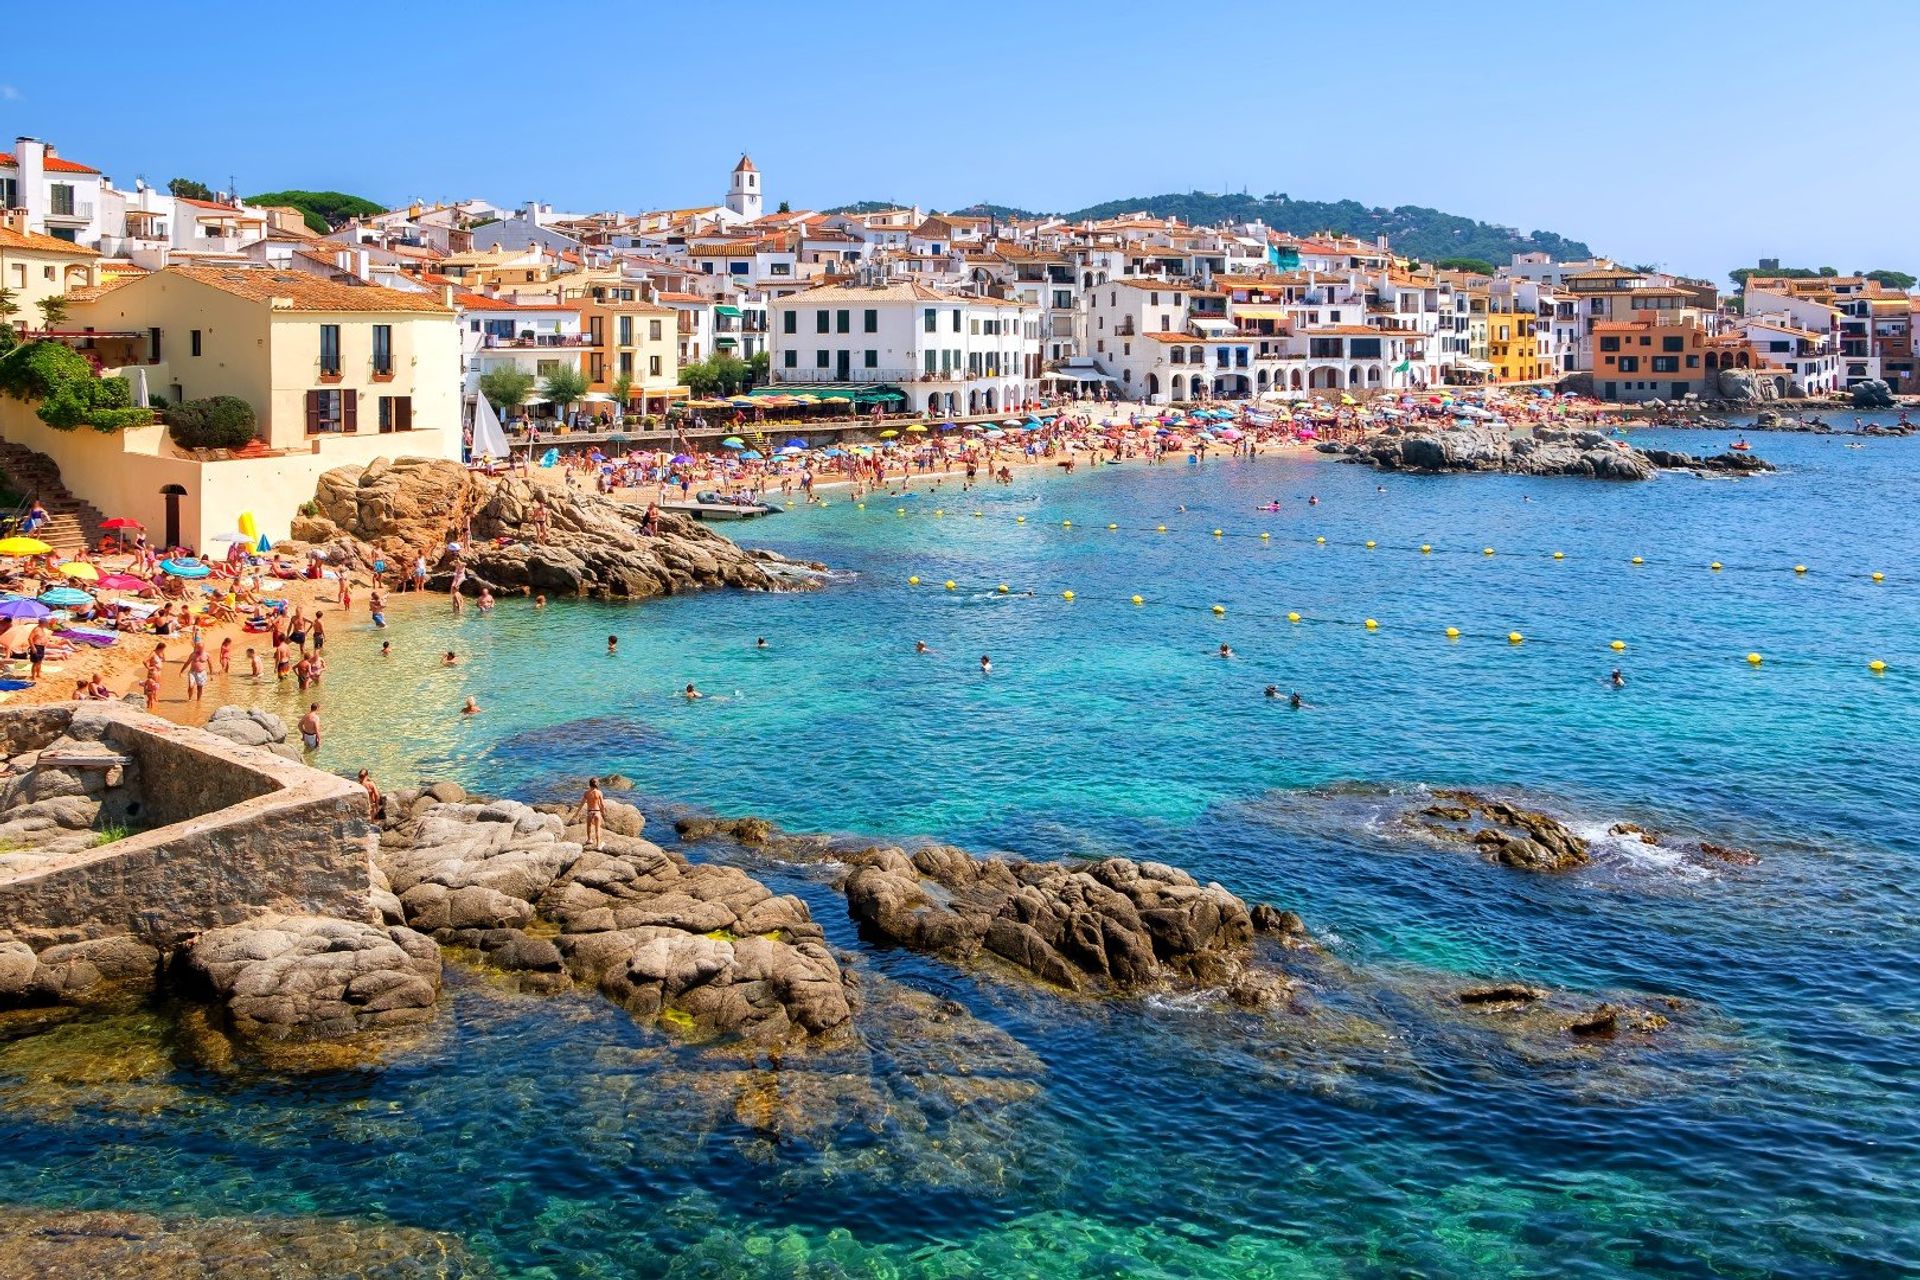 Visit the Costa Brava's Calella de Palafrugell for a laid-back family holiday by the coast